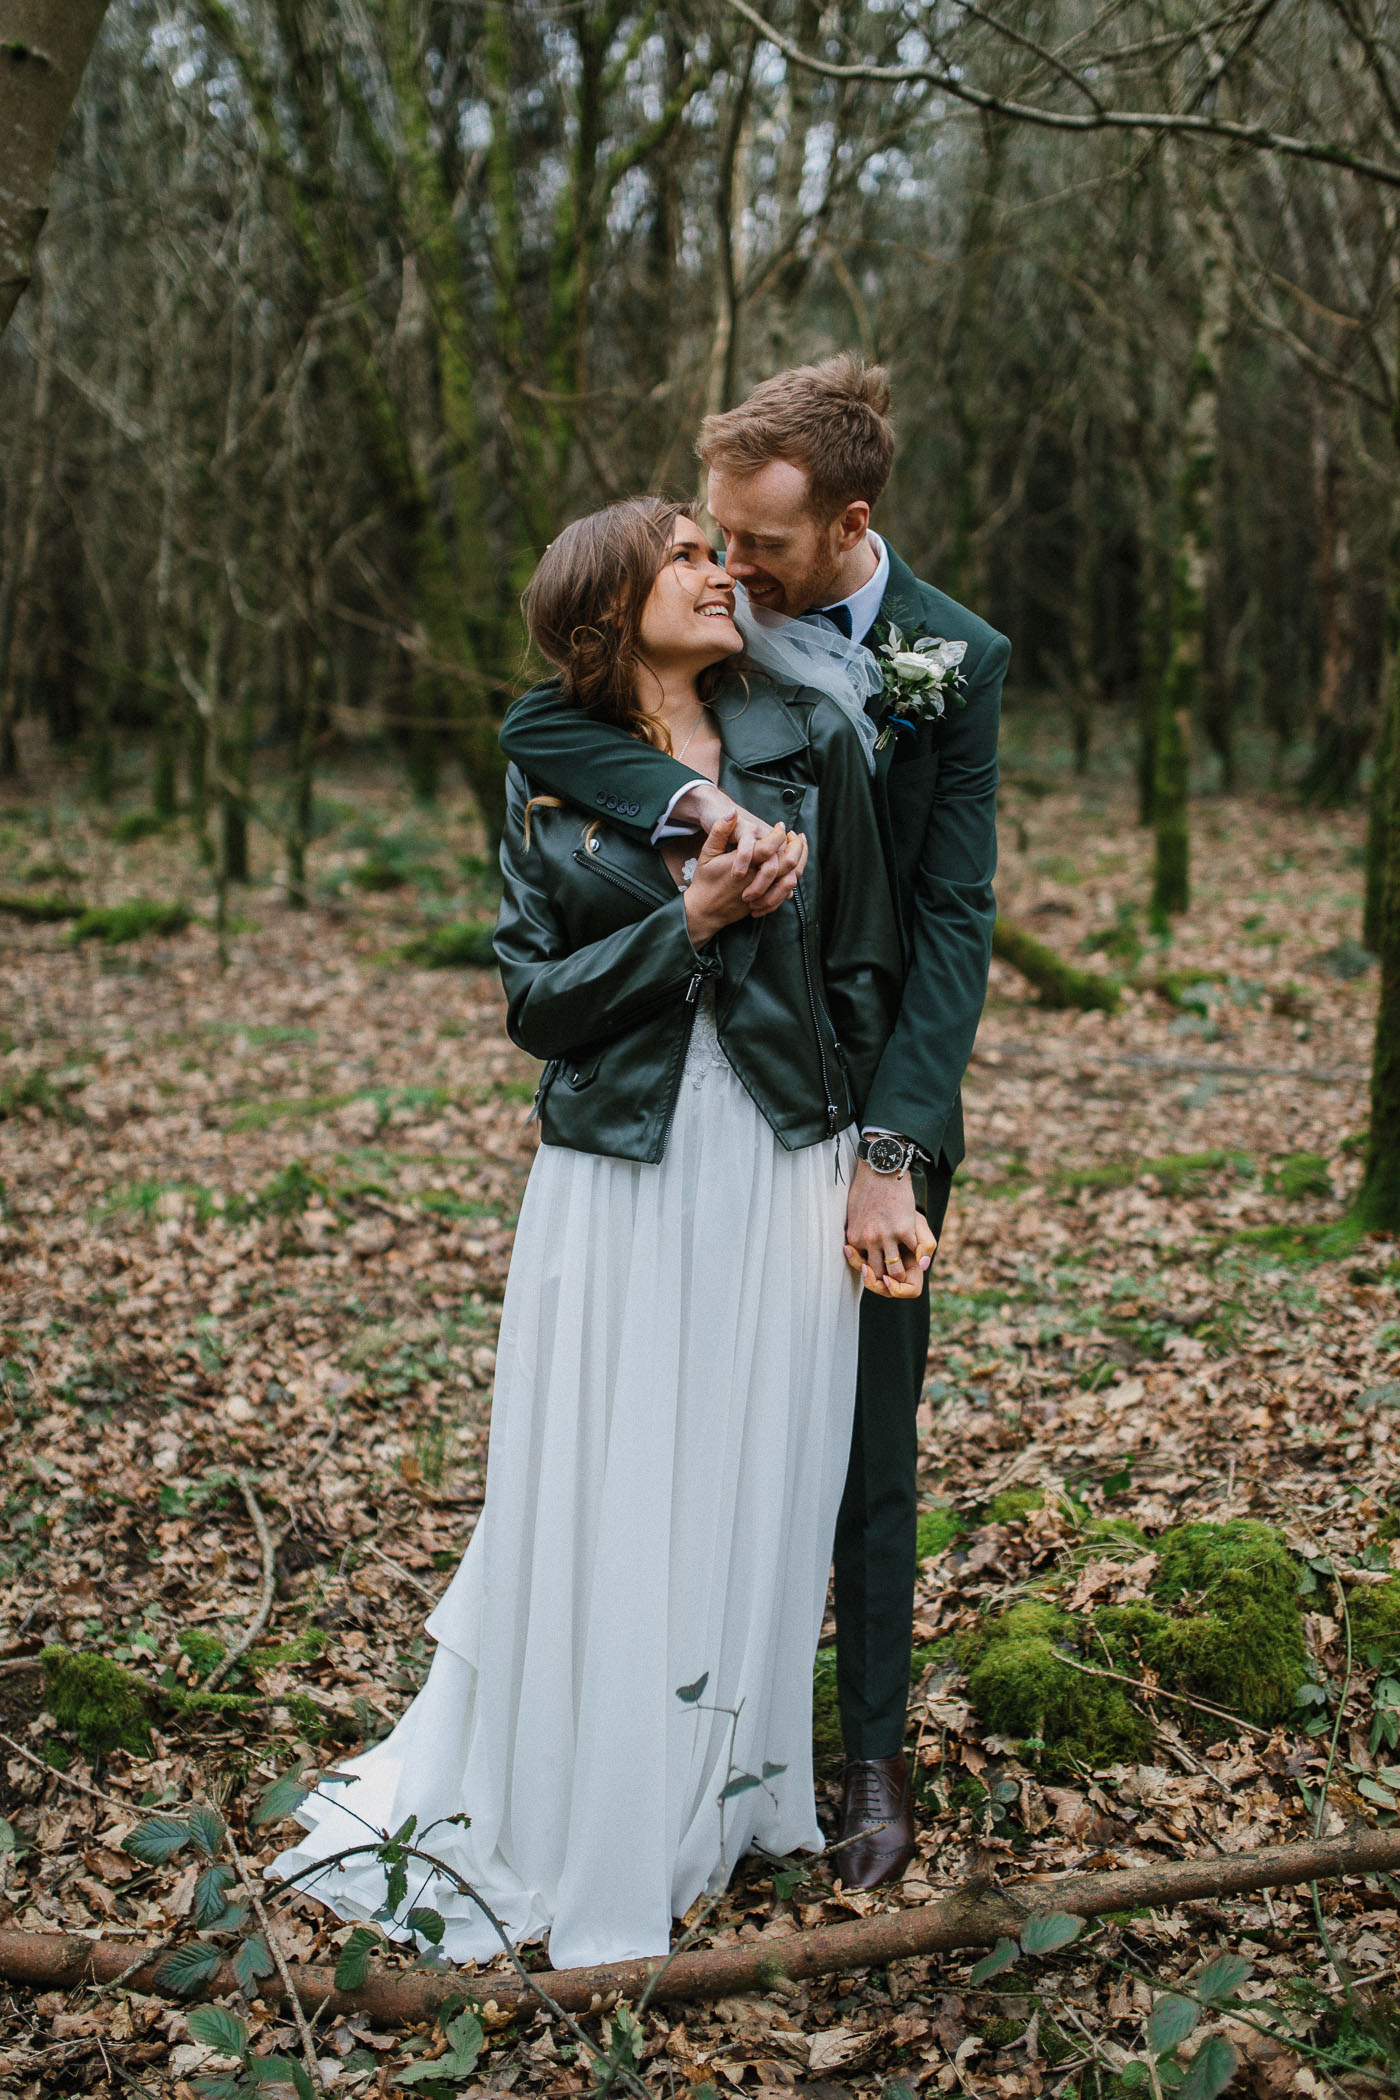 A couple pose for a photo on their wedding day. She's in a long white skirt with a black denim jacket and he's wearing a suit with a button hole. By Luke Flint Photography